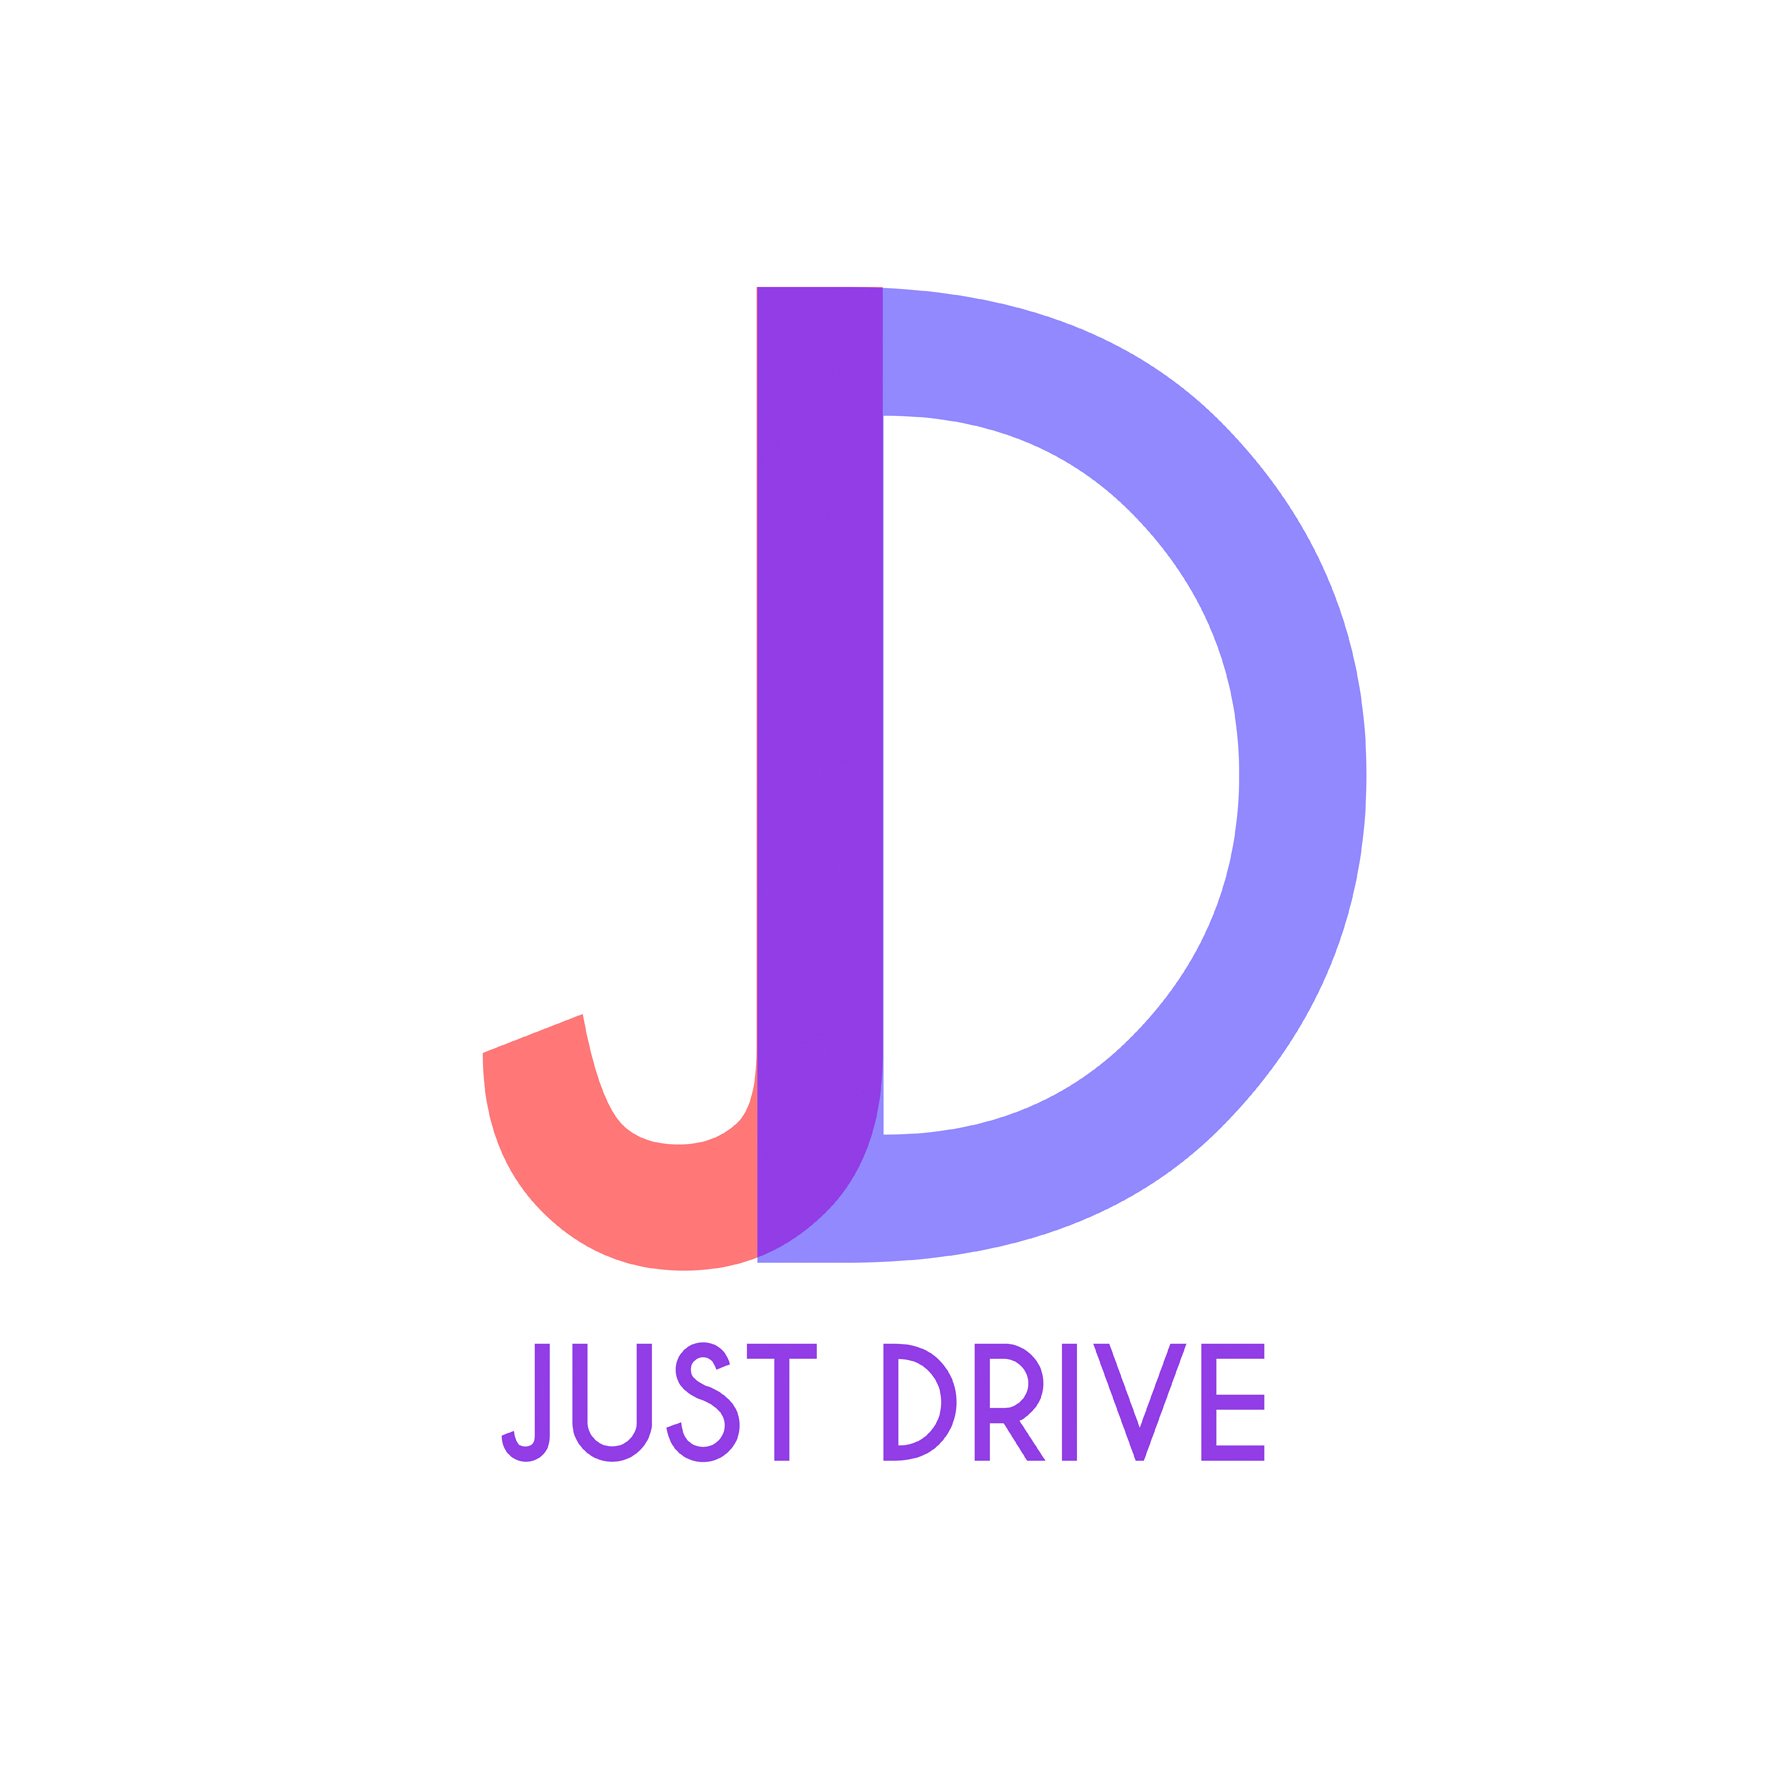 The official Twitter page for Just Drive on YouTube